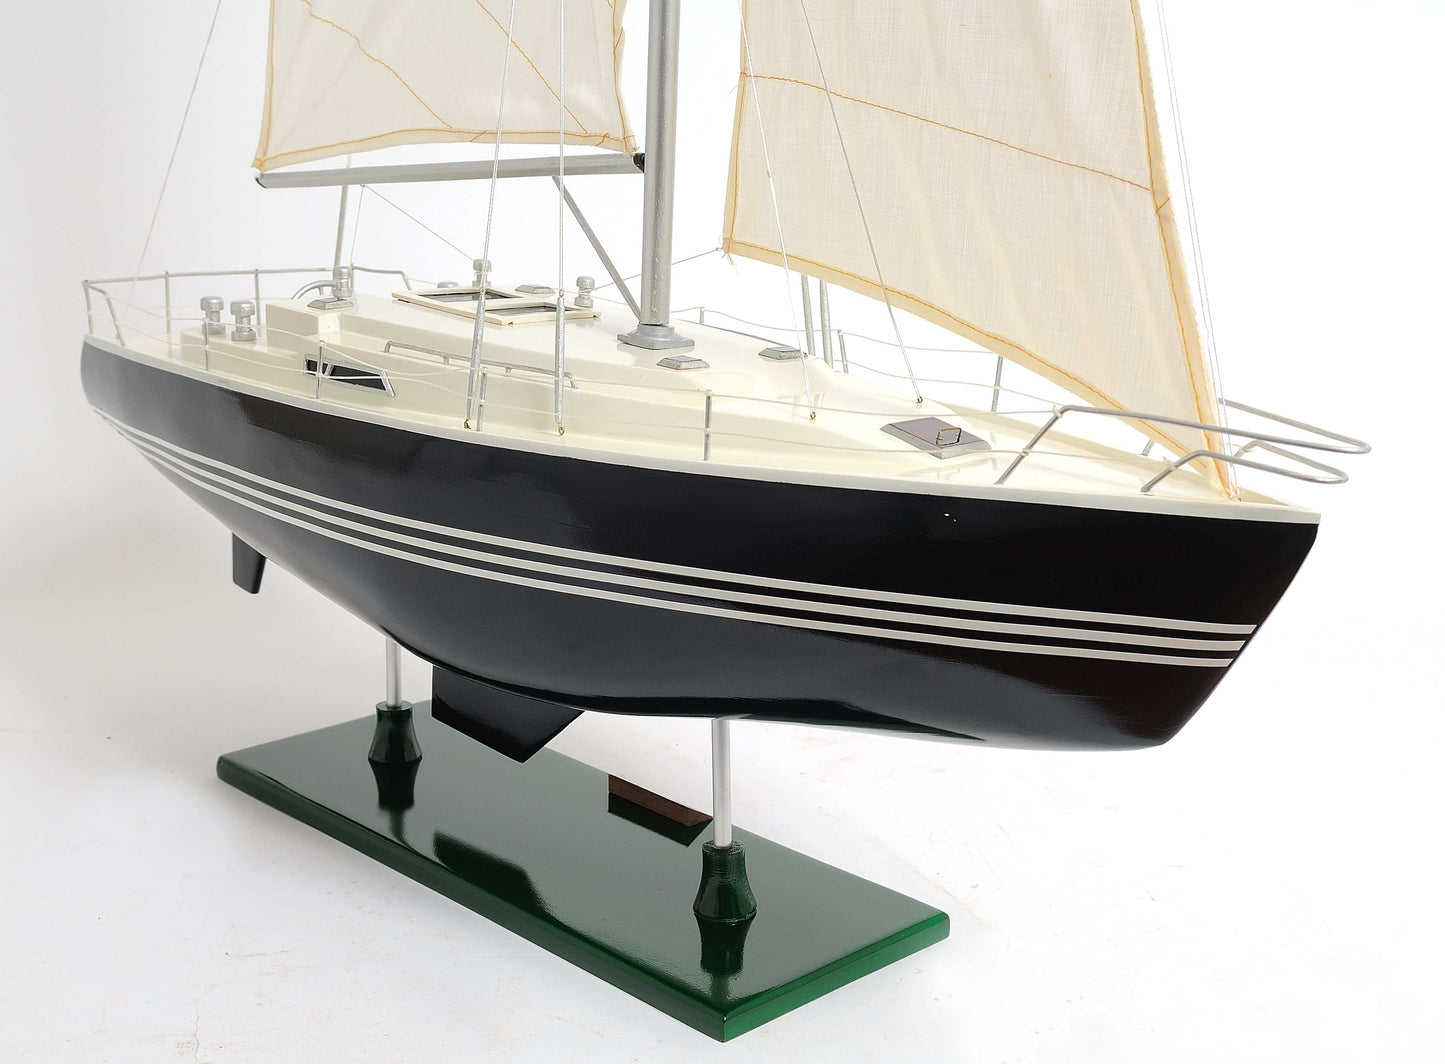 ALDO Hobbies & Creative Arts> Collectibles> Scale Model L: 29 W: 9.5 H: 47 Inches / NEW / Wood Victory Sailing Yacht Medium Sailboat Wood Model